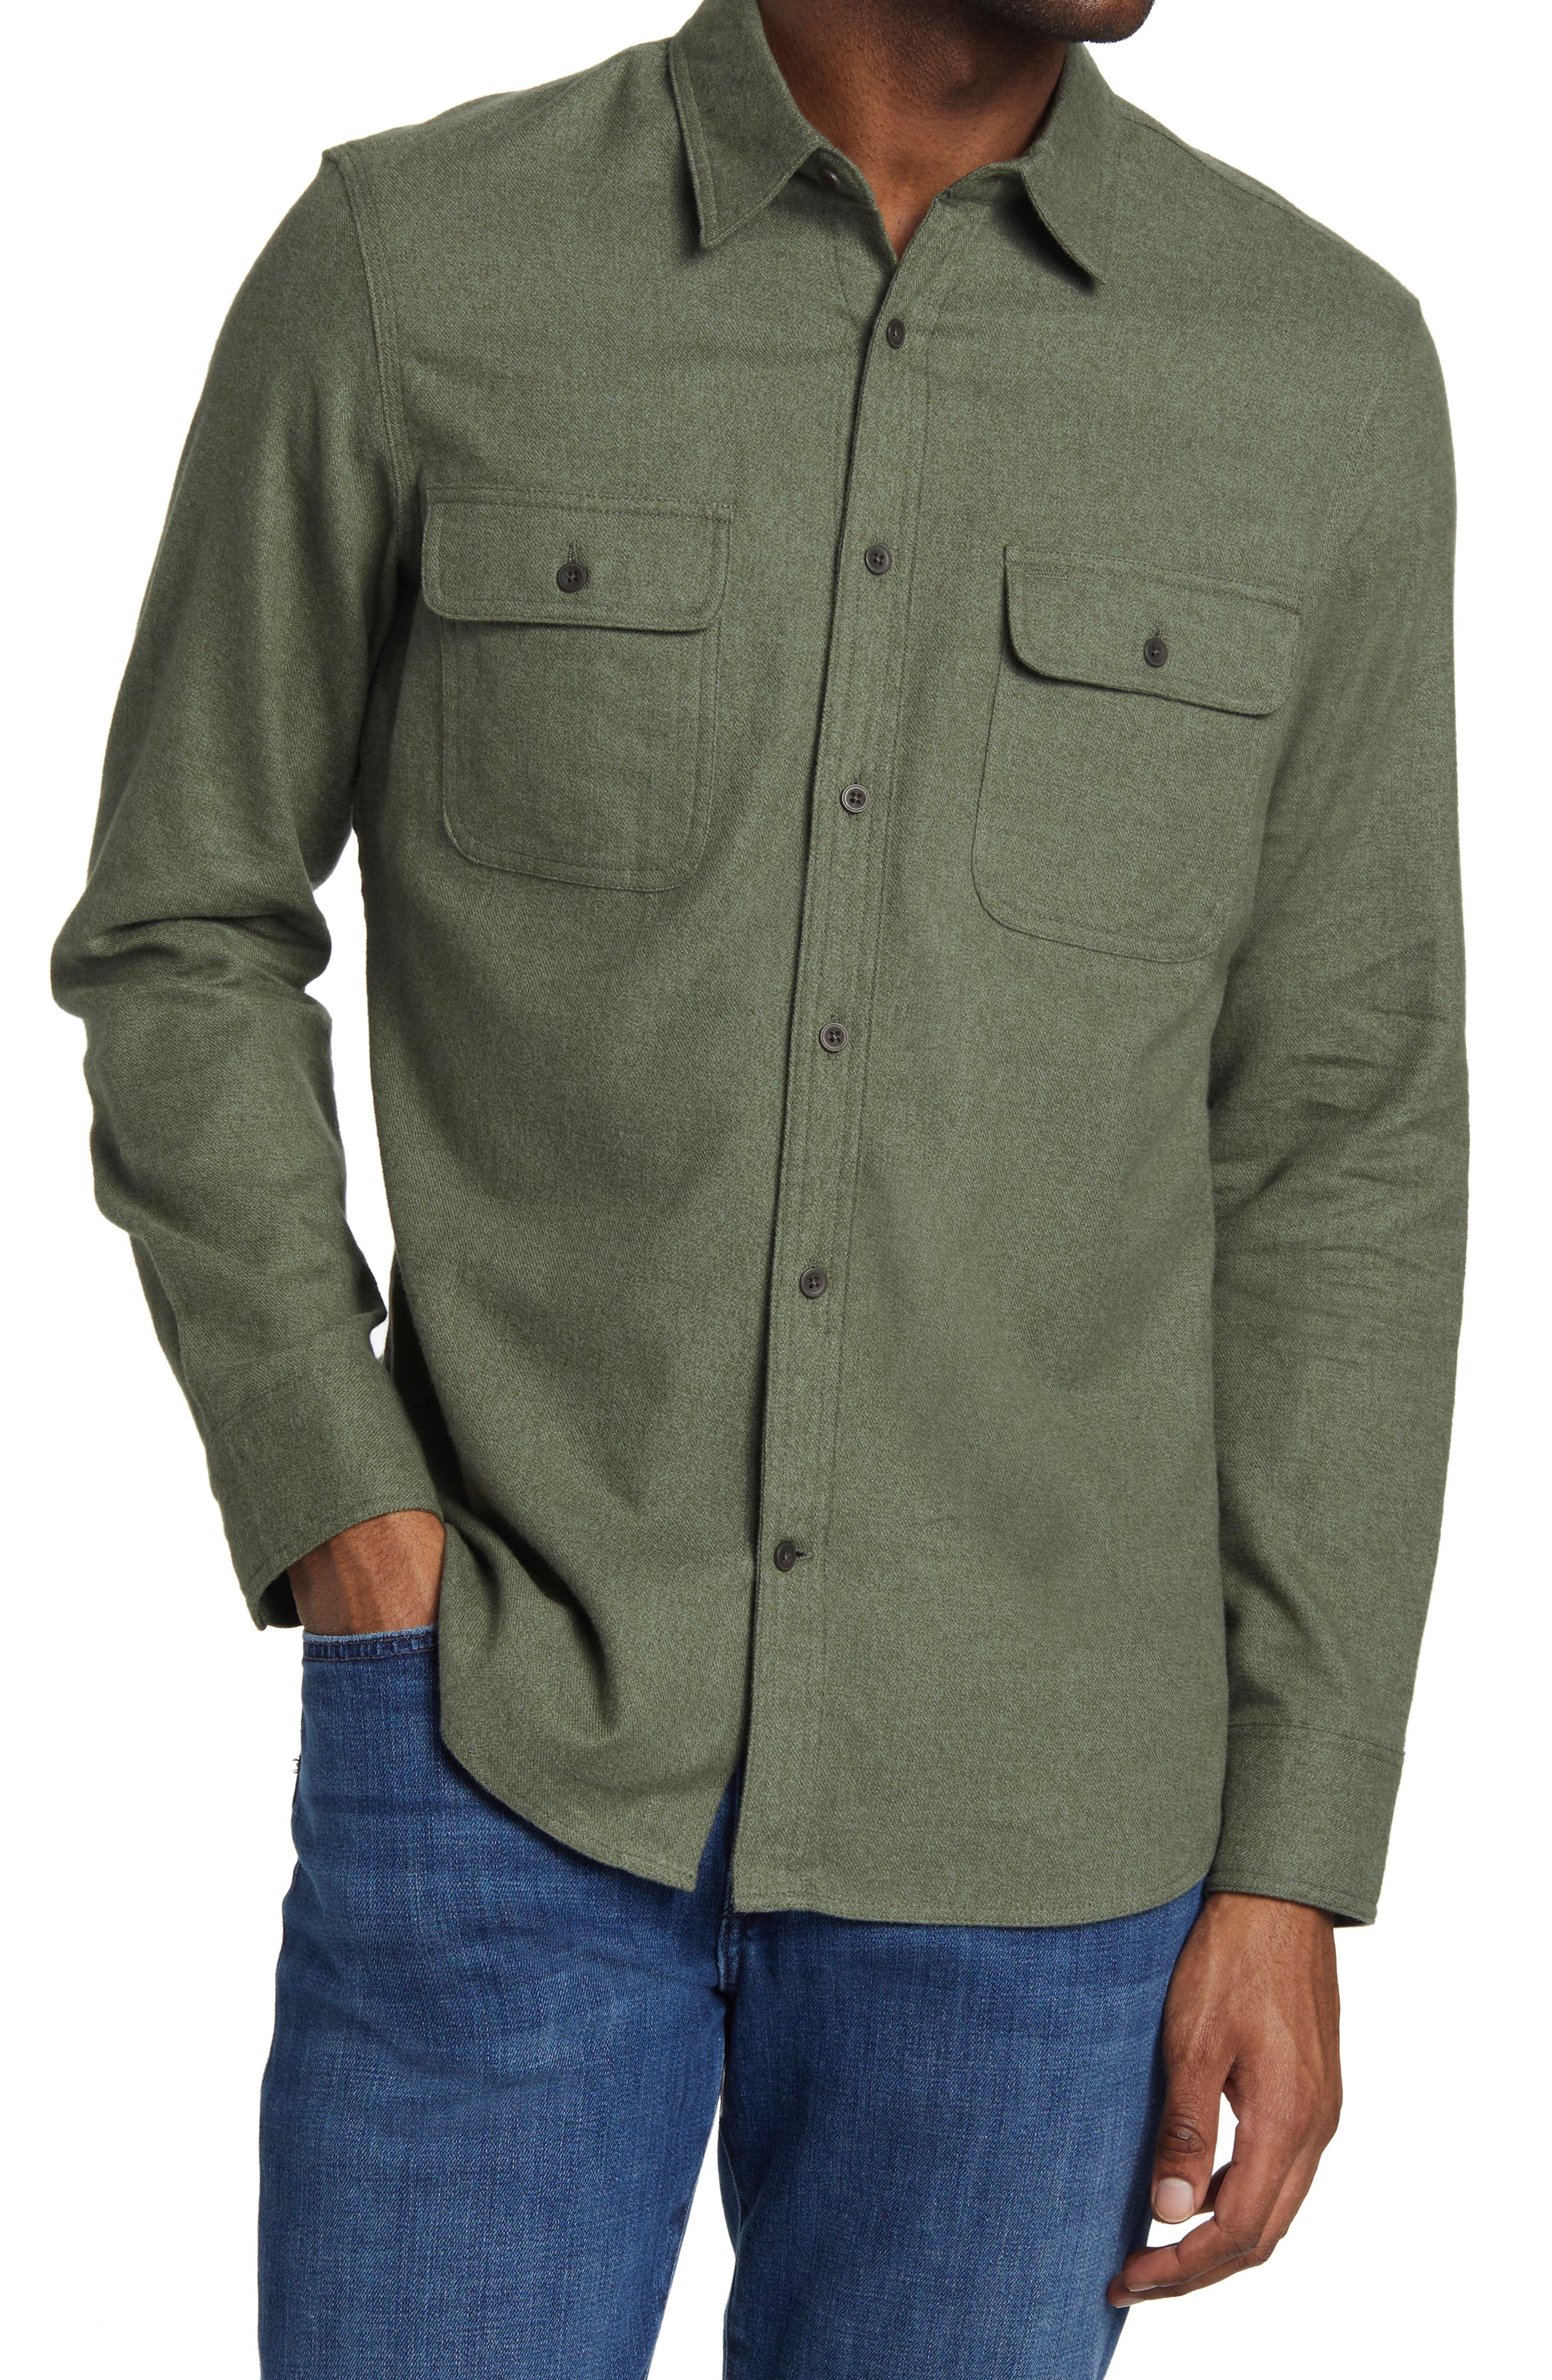 Affix Shirt in Military Green for Men Mens Clothing Shirts Casual shirts and button-up shirts Green 